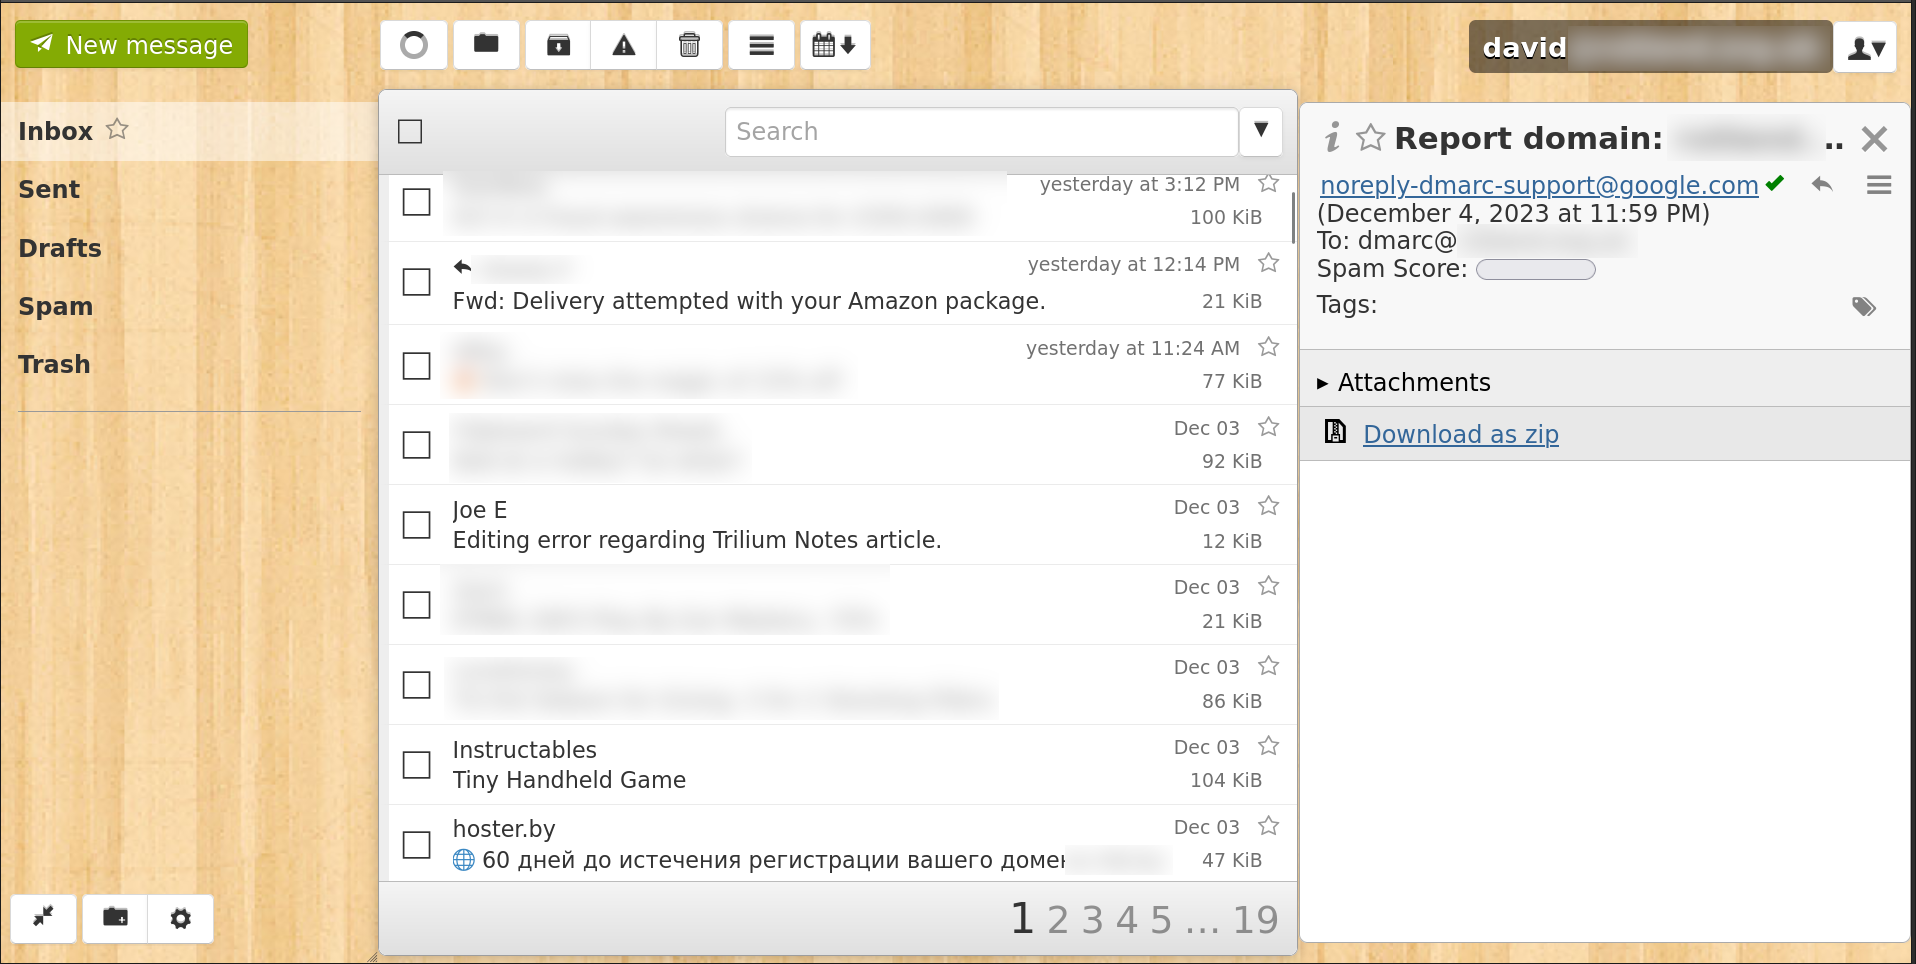 An email inbox with a snazzy wood-effect background